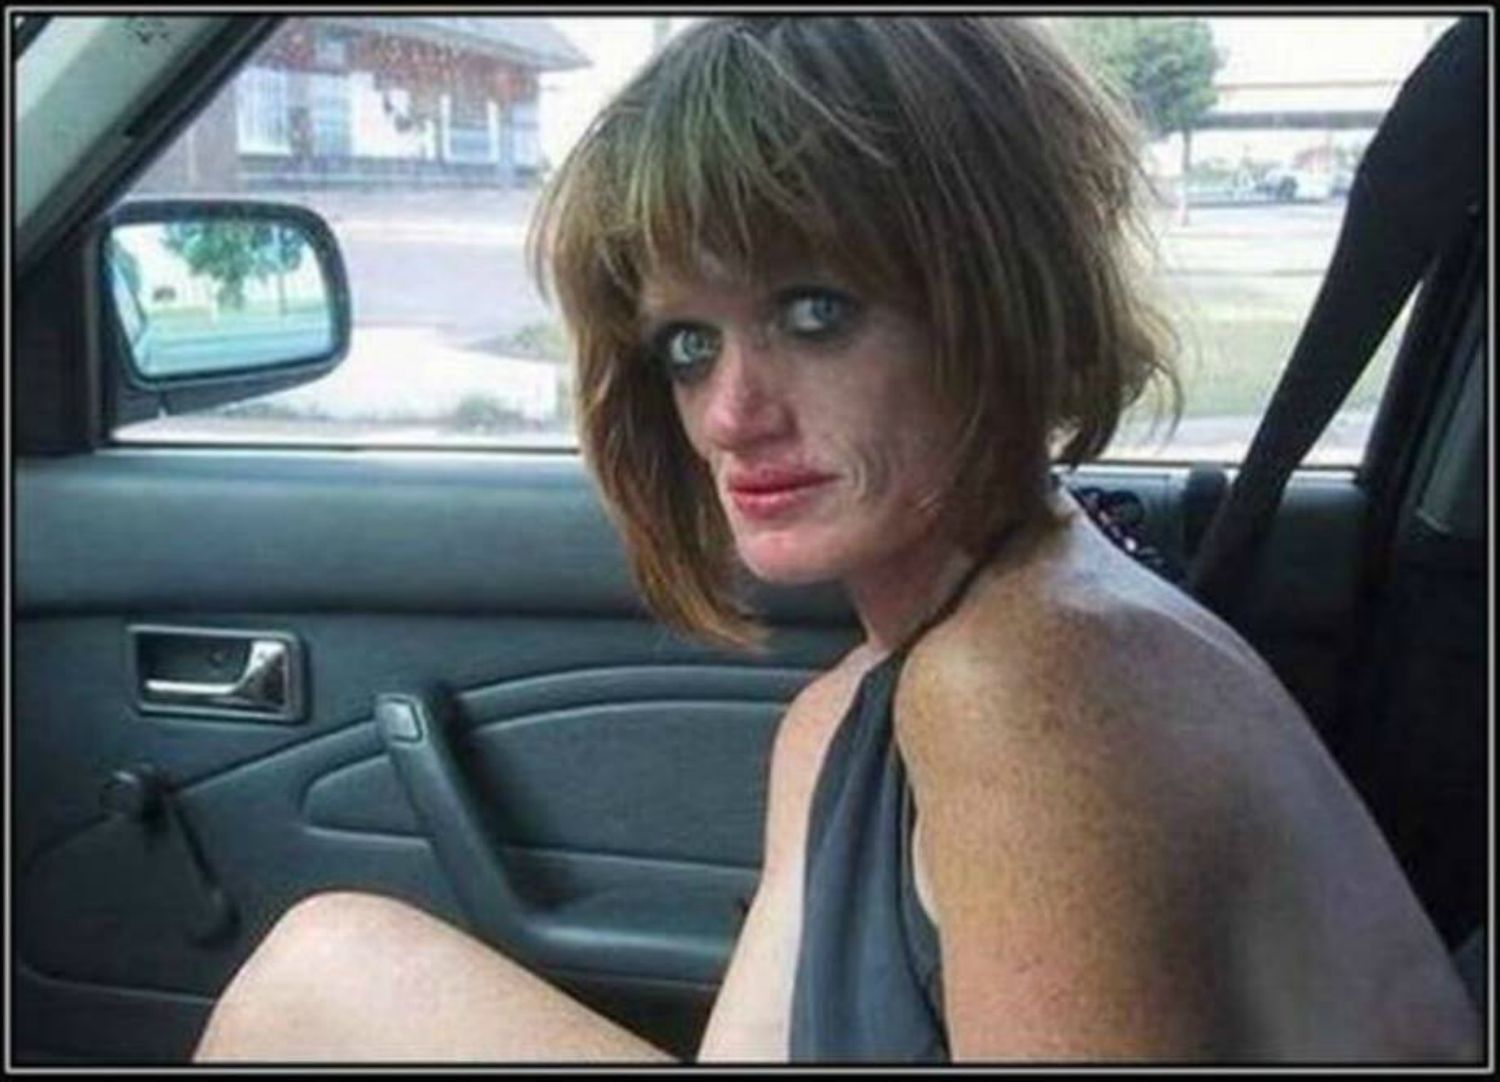 High Quality Ugly meth heroin addict Prostitute hoe in car Blank Meme Template